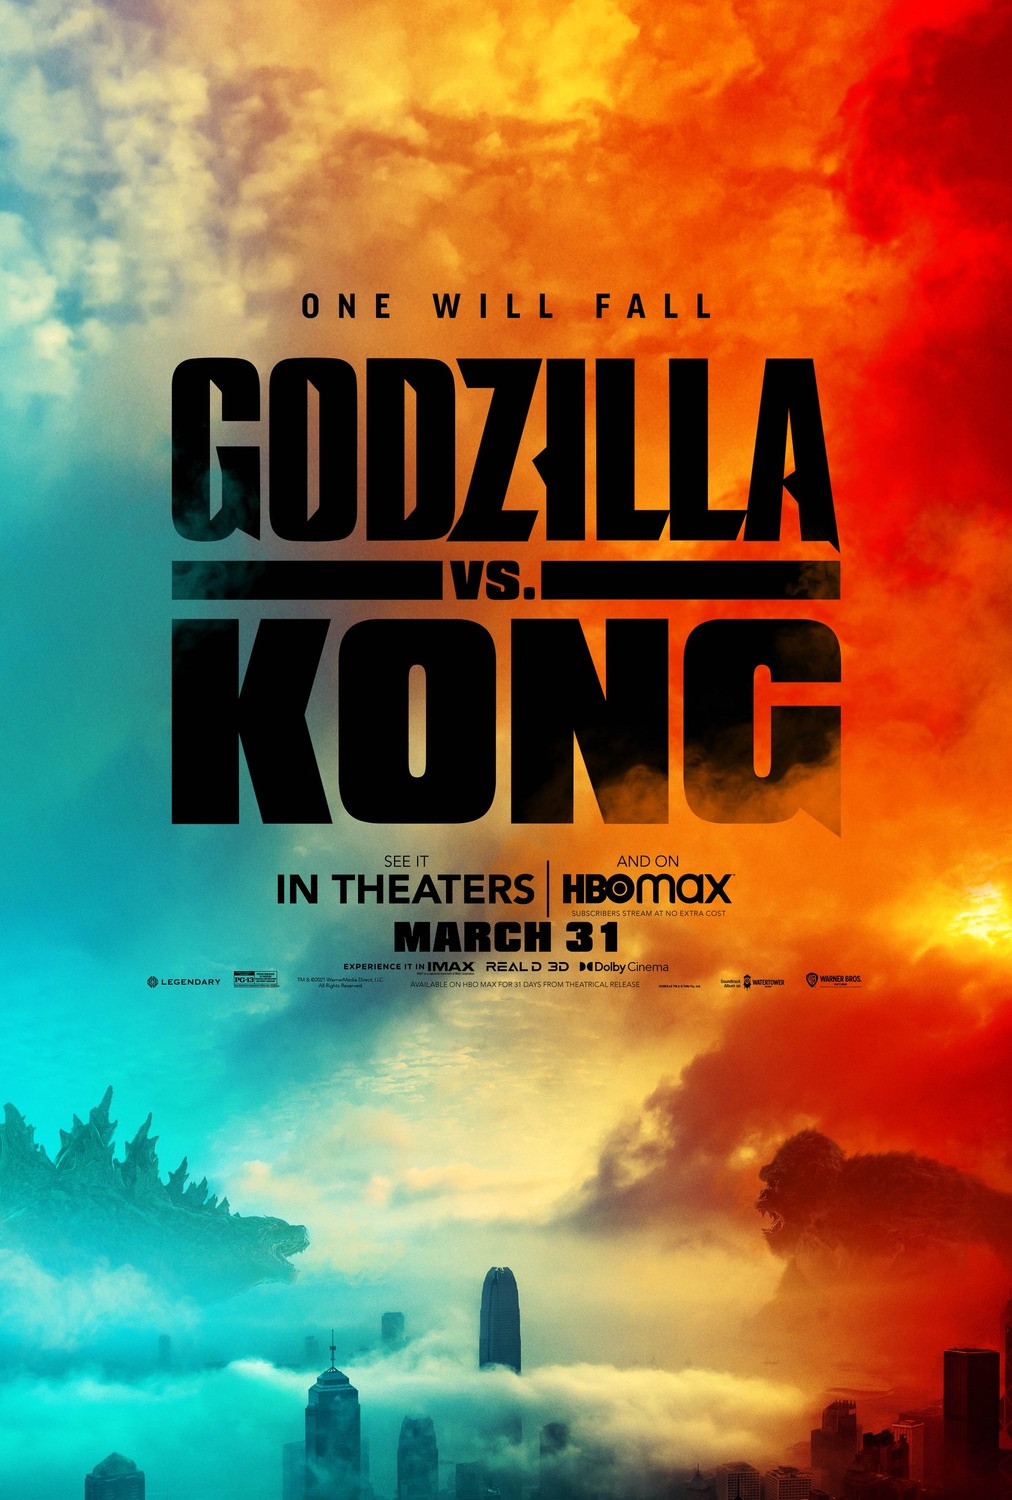 Godzilla vs. Kong continues to reign at weekend box office « Celebrity